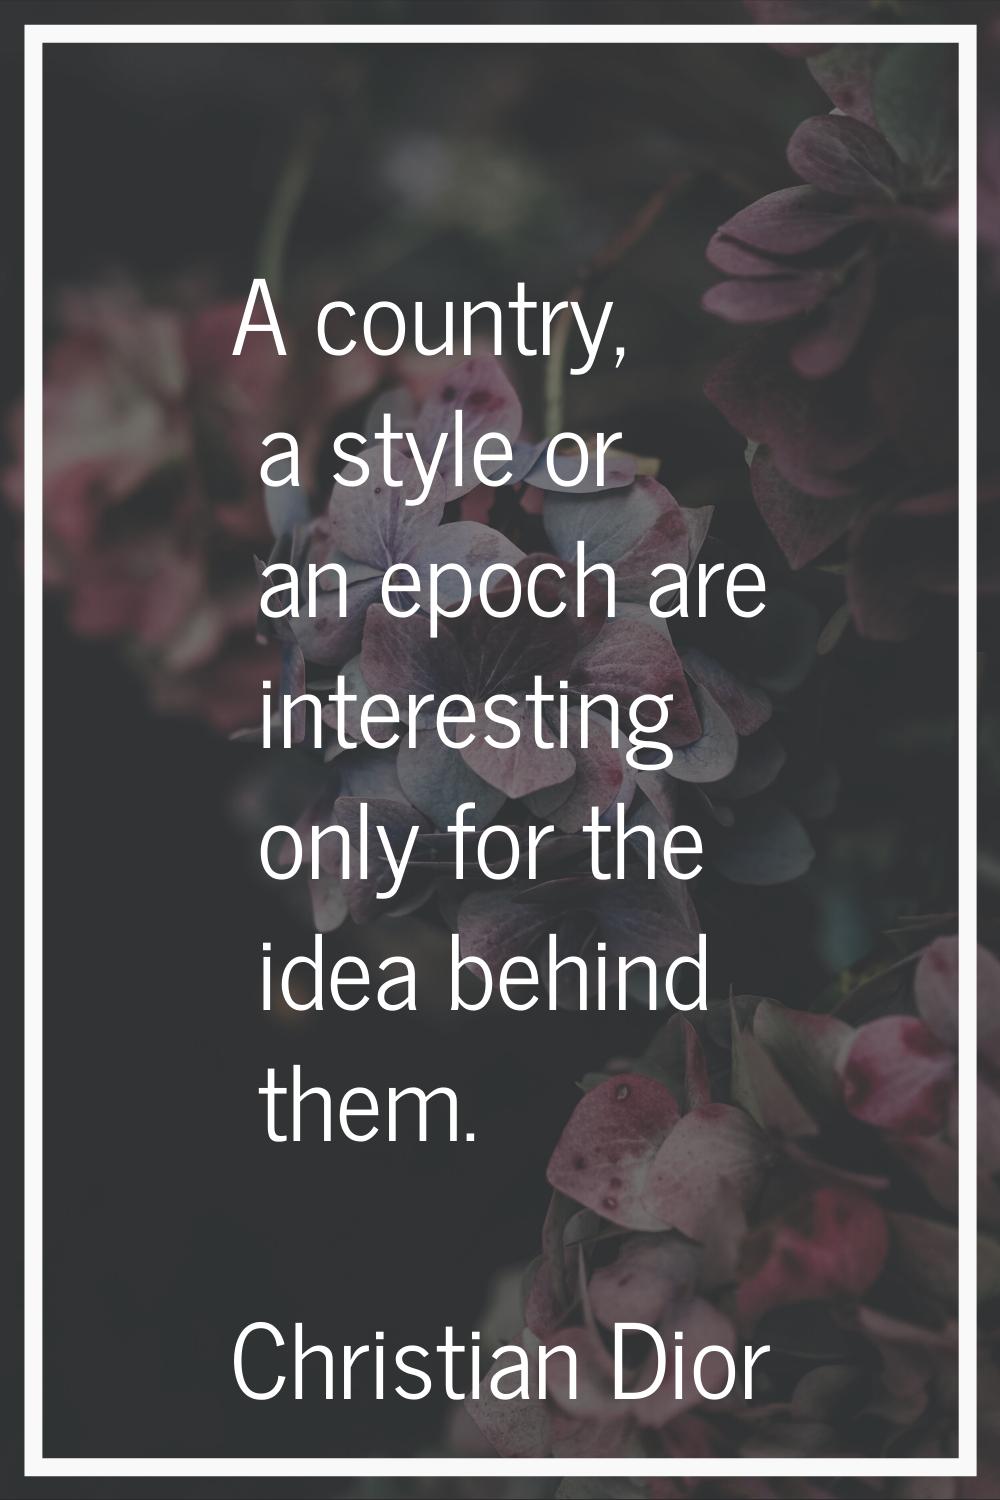 A country, a style or an epoch are interesting only for the idea behind them.